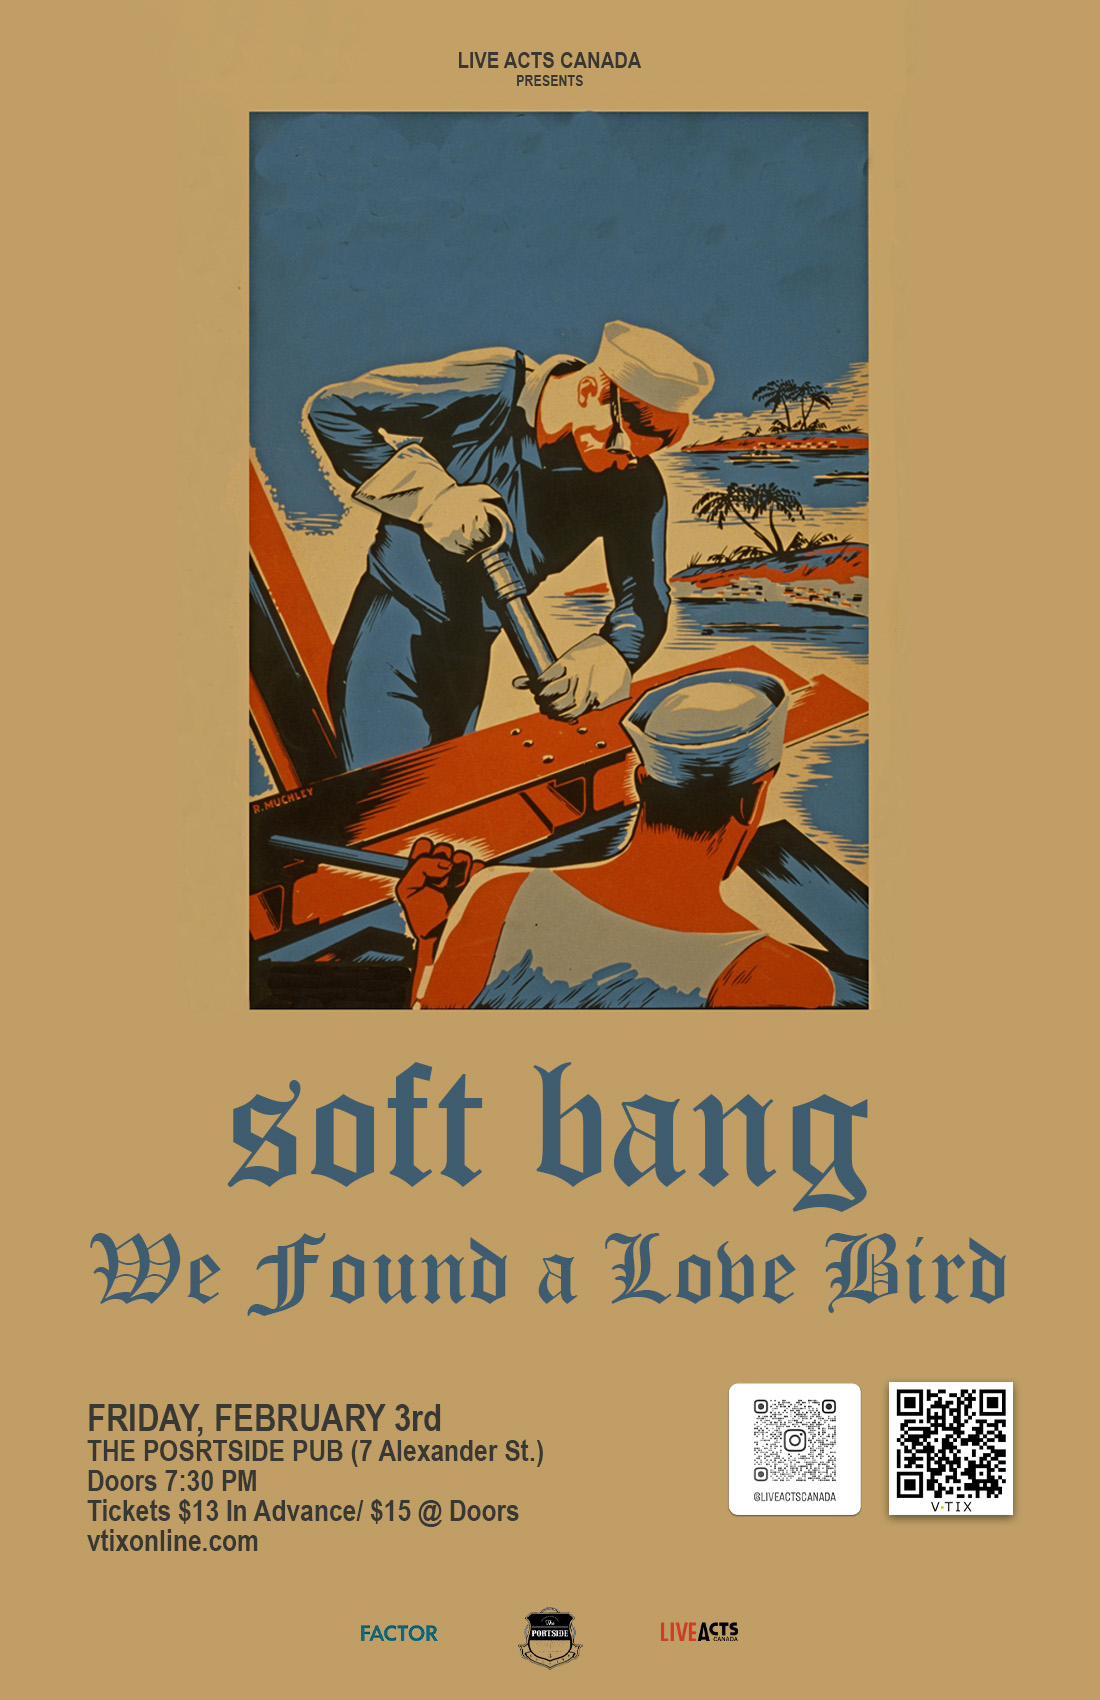 soft bang with Special Guest We Found a Love Bird